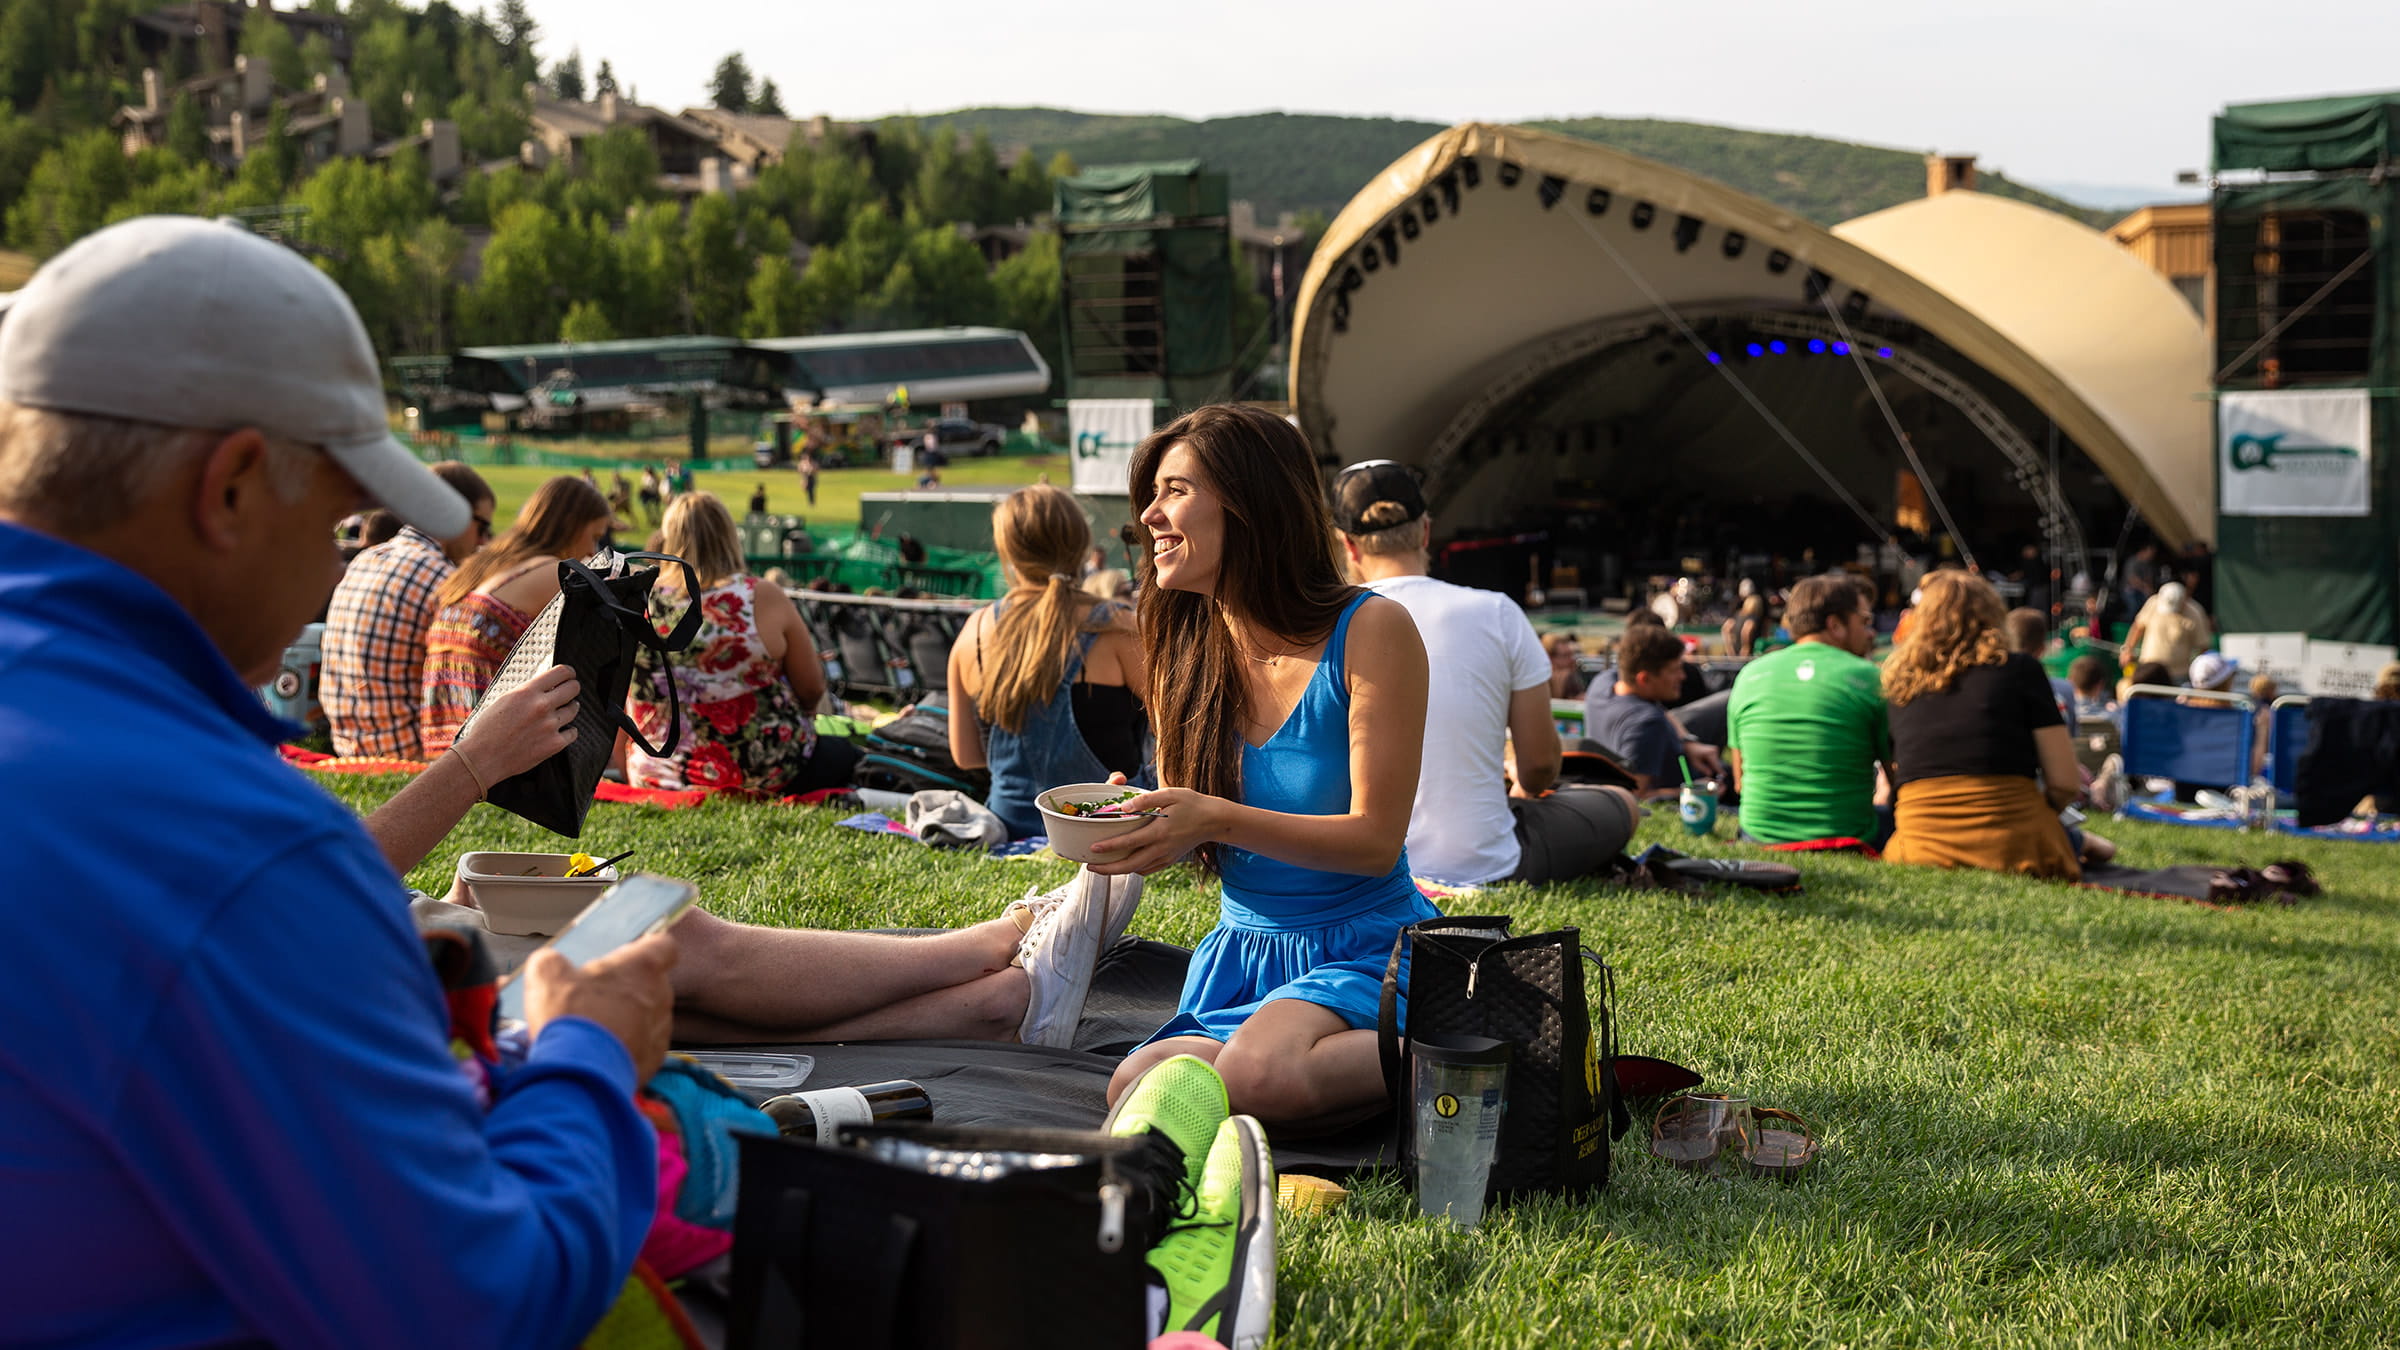 Guests eating dinner while waiting for a summer concert at the Deer Valley Outdoor Amphitheater.